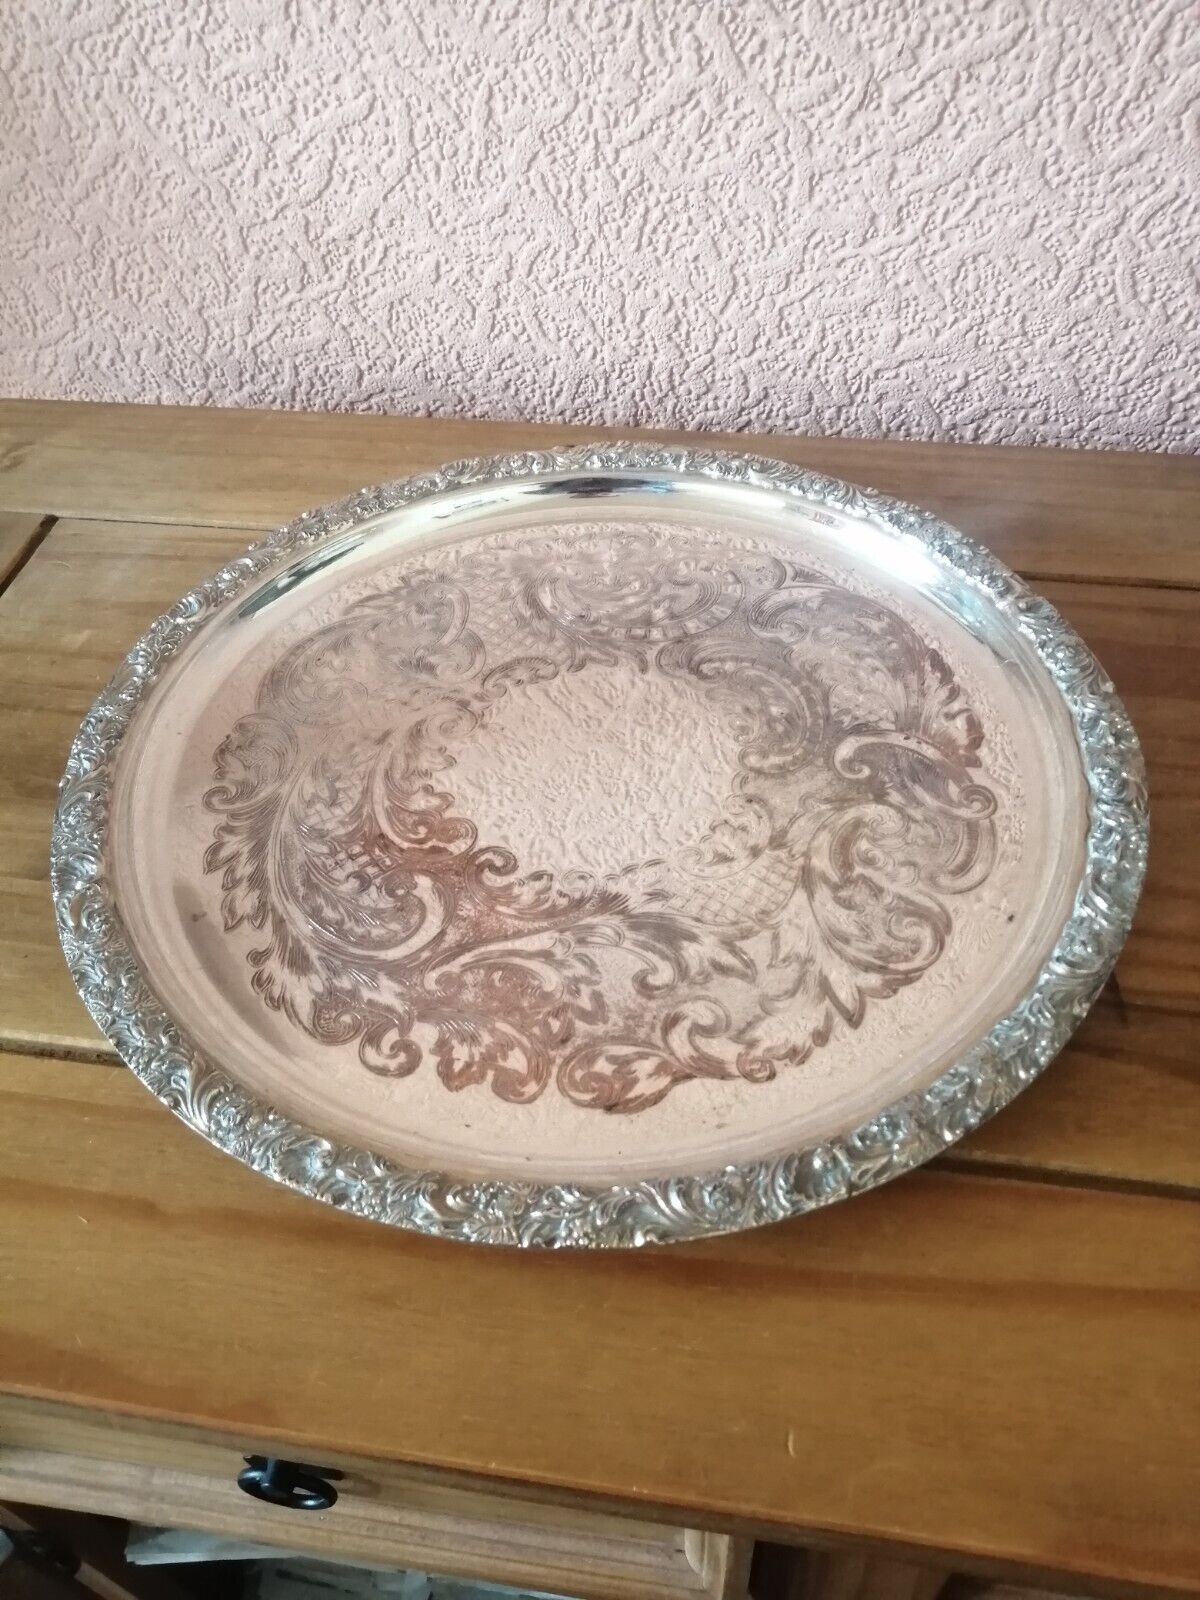 Antique Valuations: Large Antique Serving Tray, Silver Plate on Copper